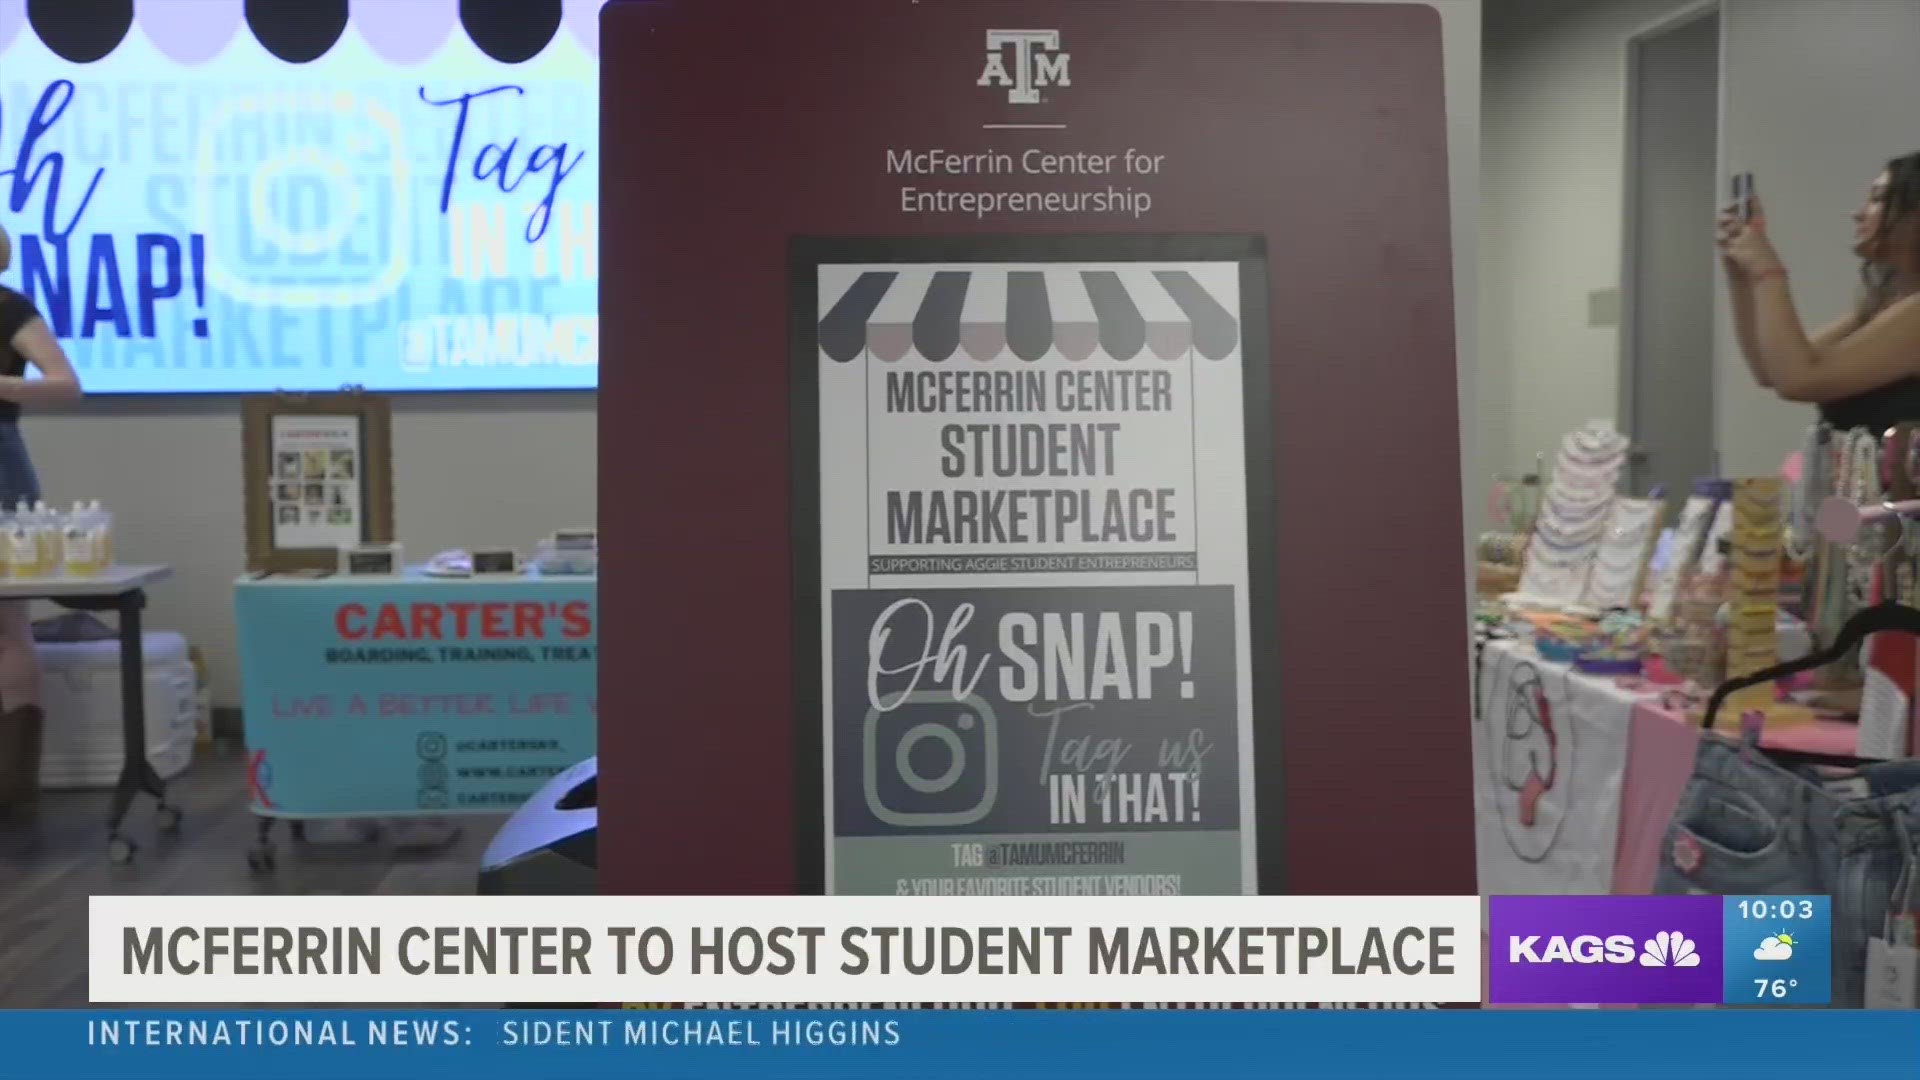 Since 2021, the student marketplace at Texas A&M has been a public event that features businesses run and operated by current Aggies.